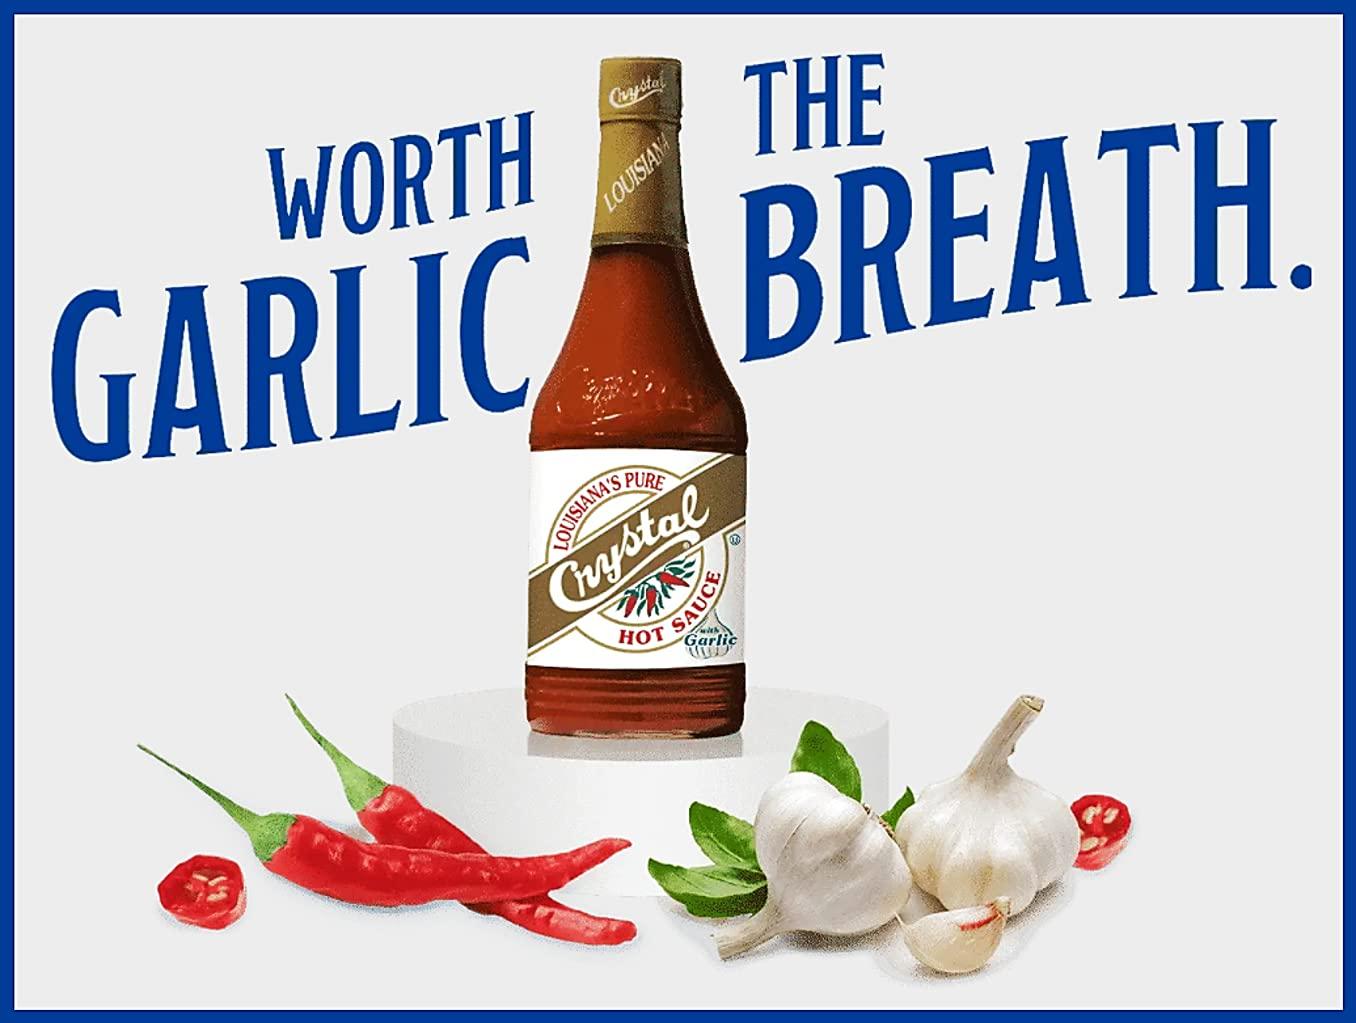 Crystal Louisiana's Pure Hot Sauce with Garlic, 12 Ounce, Aged Cayenne  Peppers, Medium Heat, Flavor Gumbo to Bloody Mary's